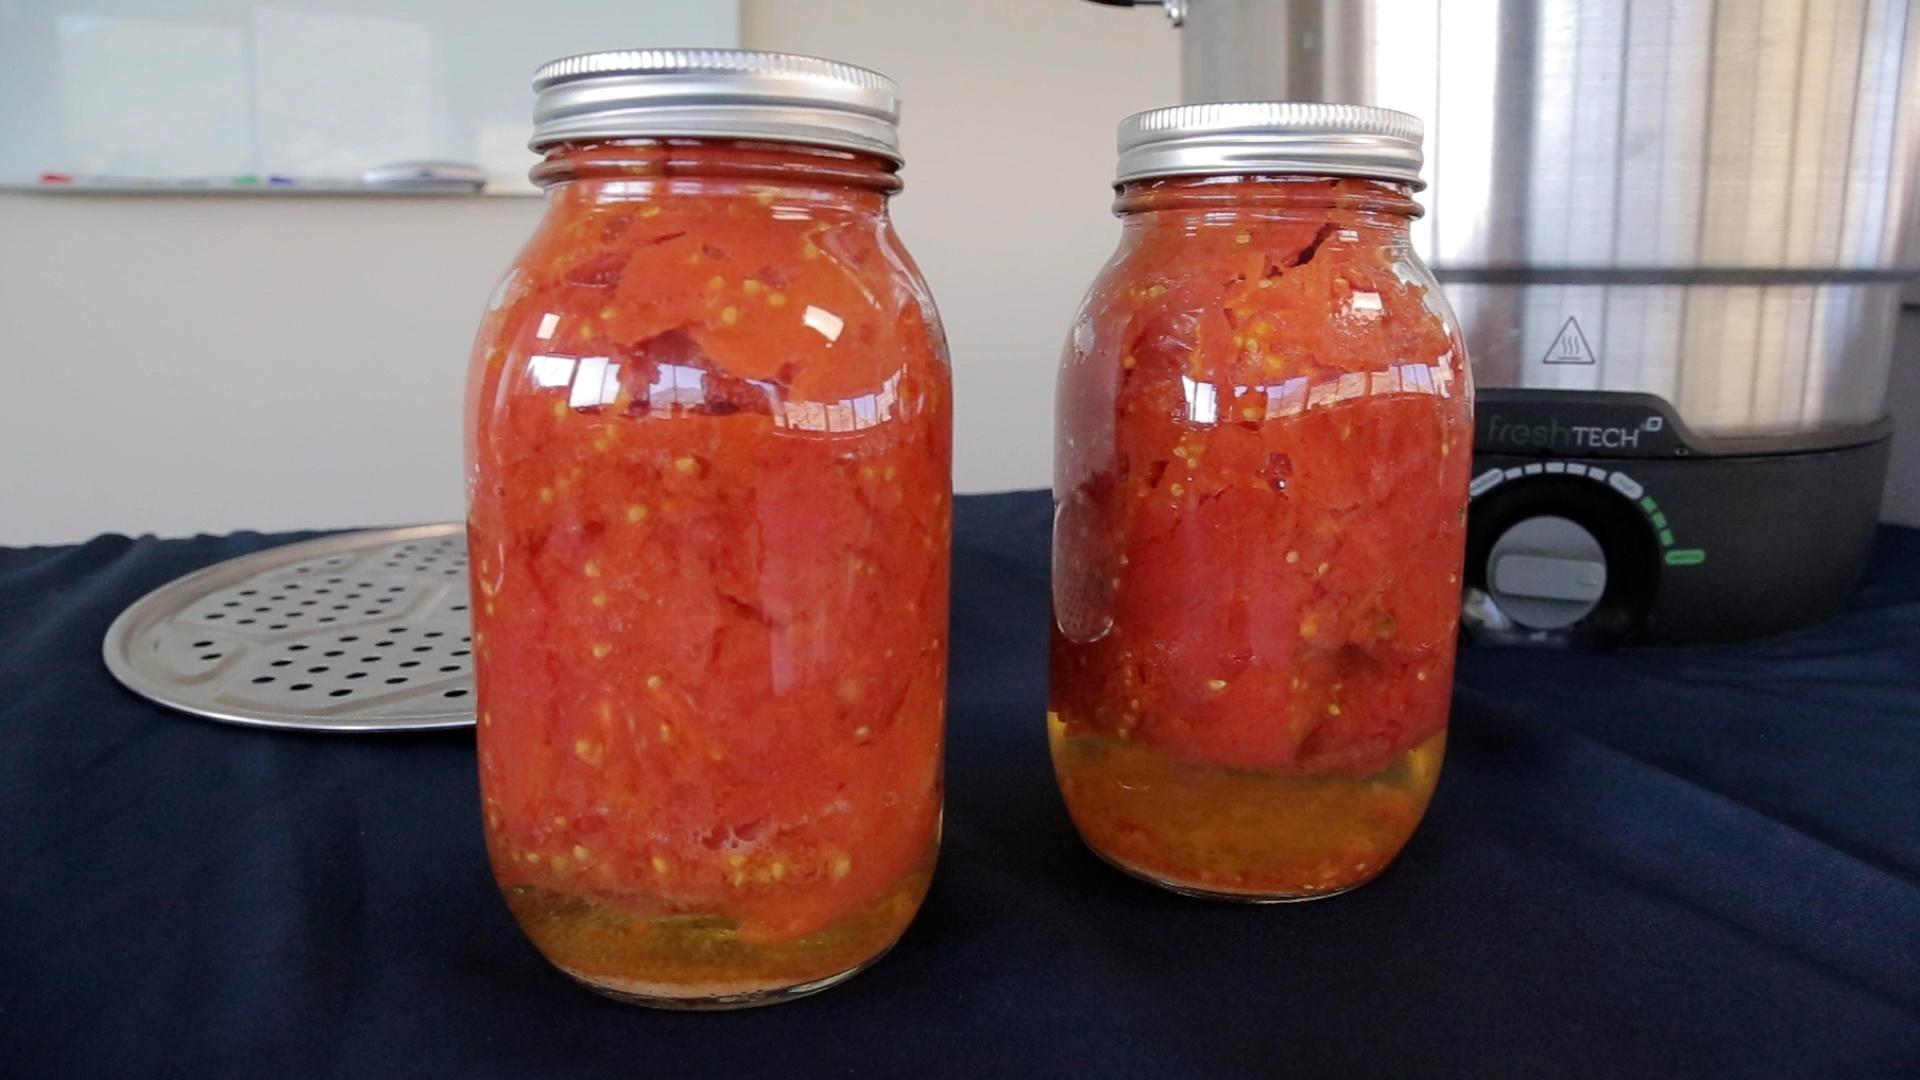 Natural separation of tomatoes and their juice after processing.